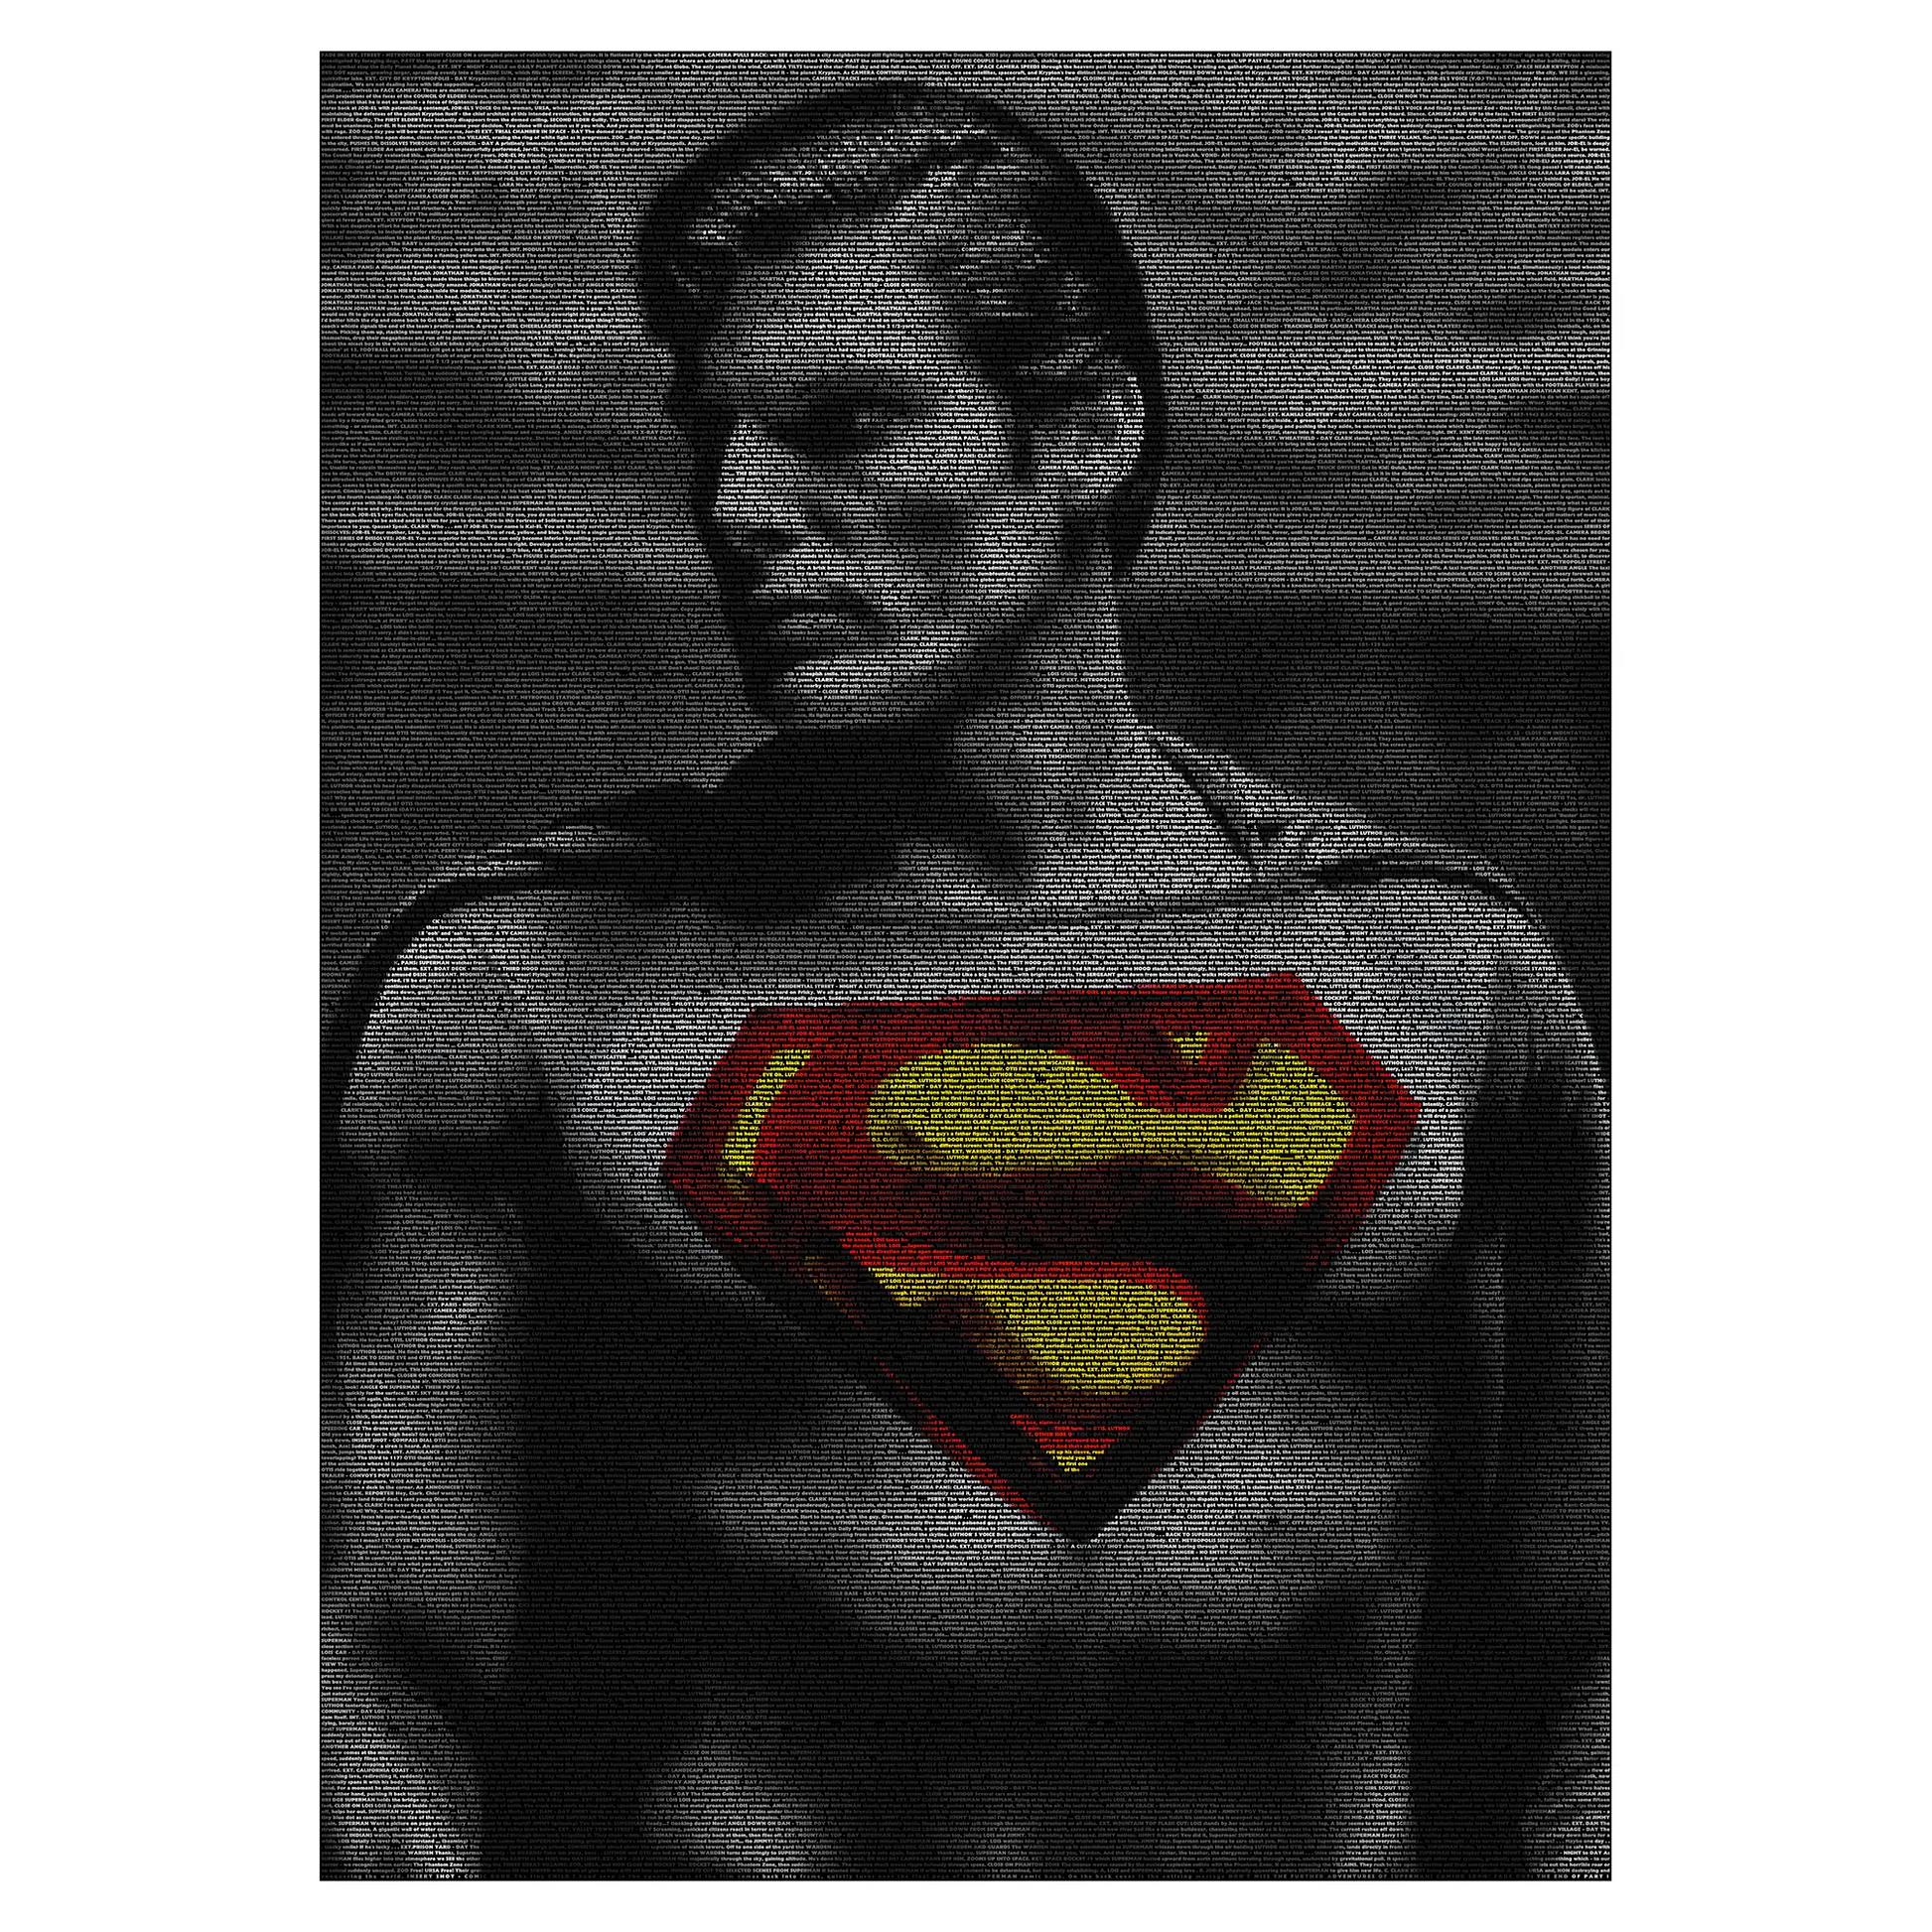 A black and white portrait of Christopher Reeve as Superman, with a red and yellow chest symbol.